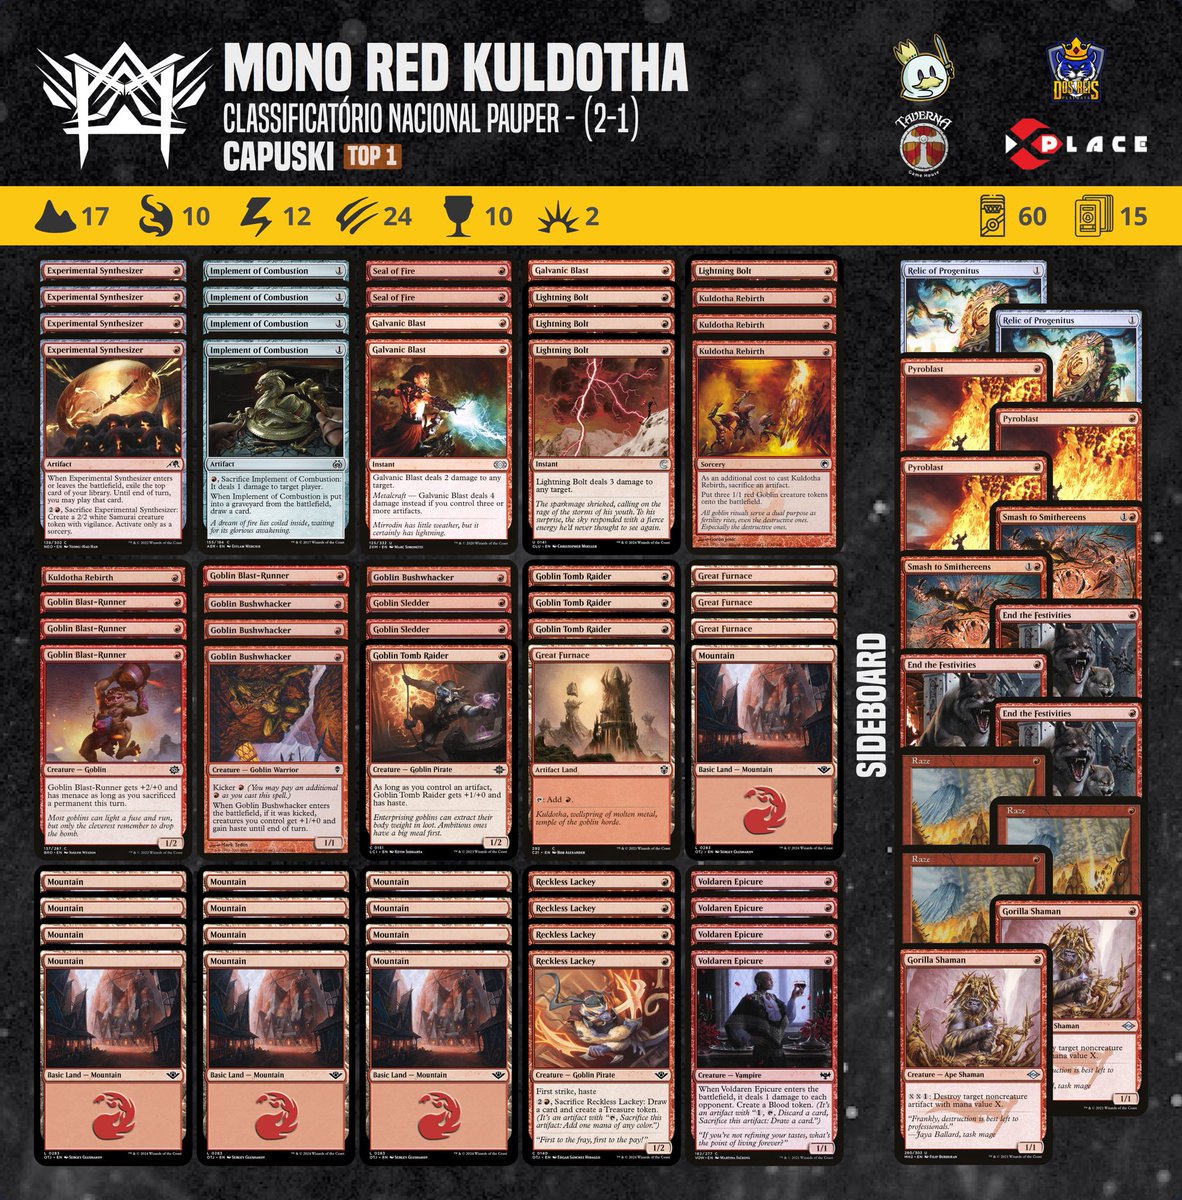 Our athlete Capuski achieved a 2-1 victory in the National Pauper Qualifying Tournament with this Mono Red Kuldotha decklist.

#pauper  #magic #mtgcommon #metagamepauper #mtgpauper #magicthegathering #wizardsofthecoast 

@PauperDecklists @fireshoes